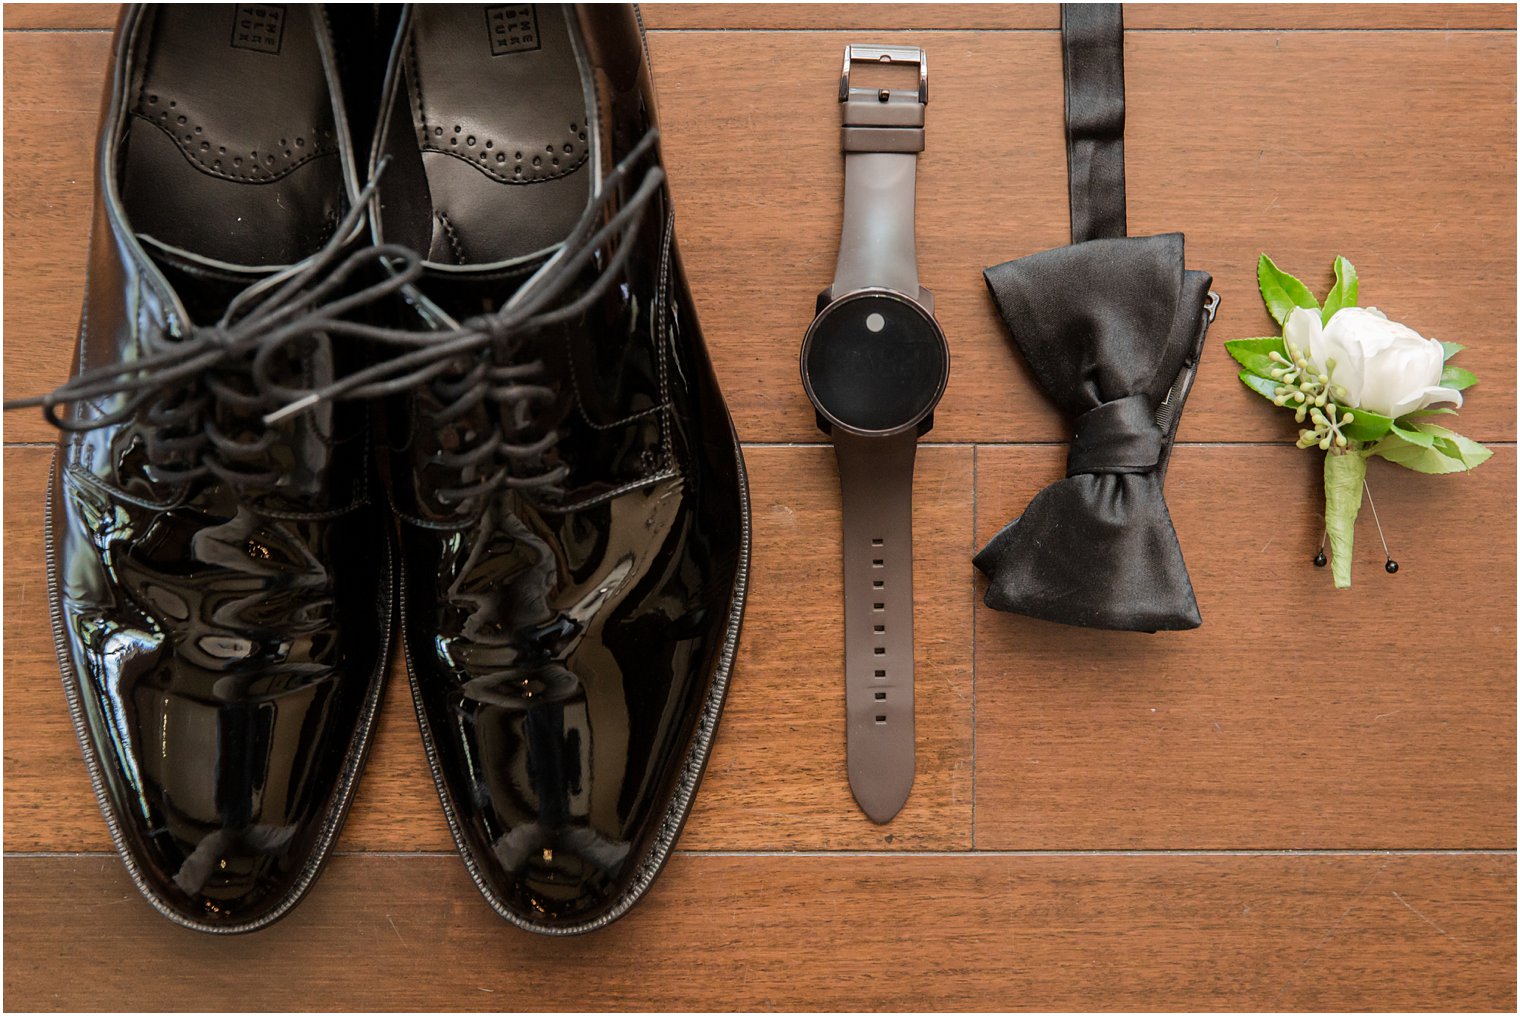 Groom's shoes, watch, bow tie, and boutonniere